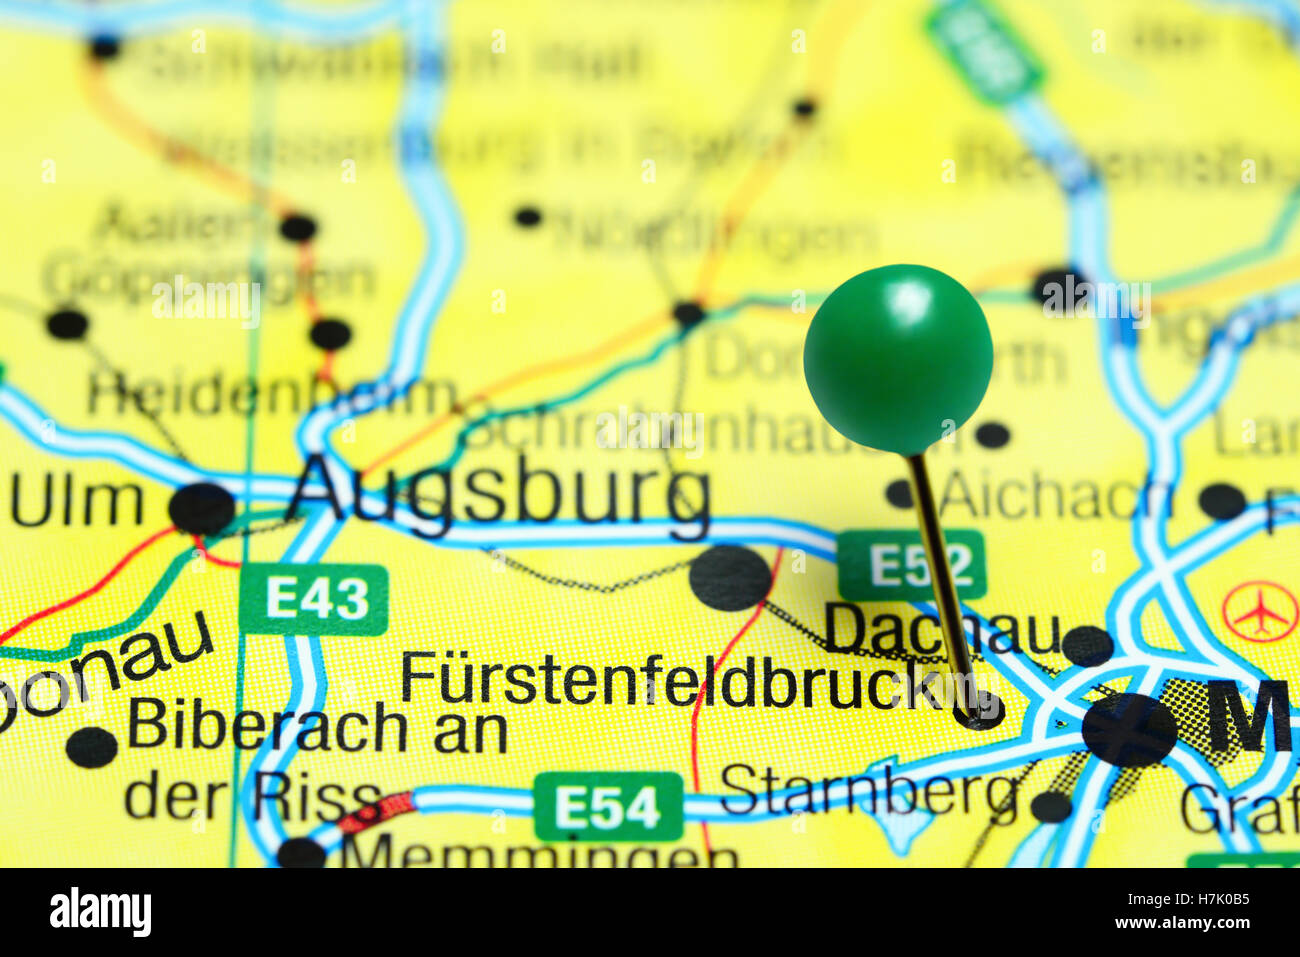 Furstenfeldbruck pinned on a map of Germany Stock Photo